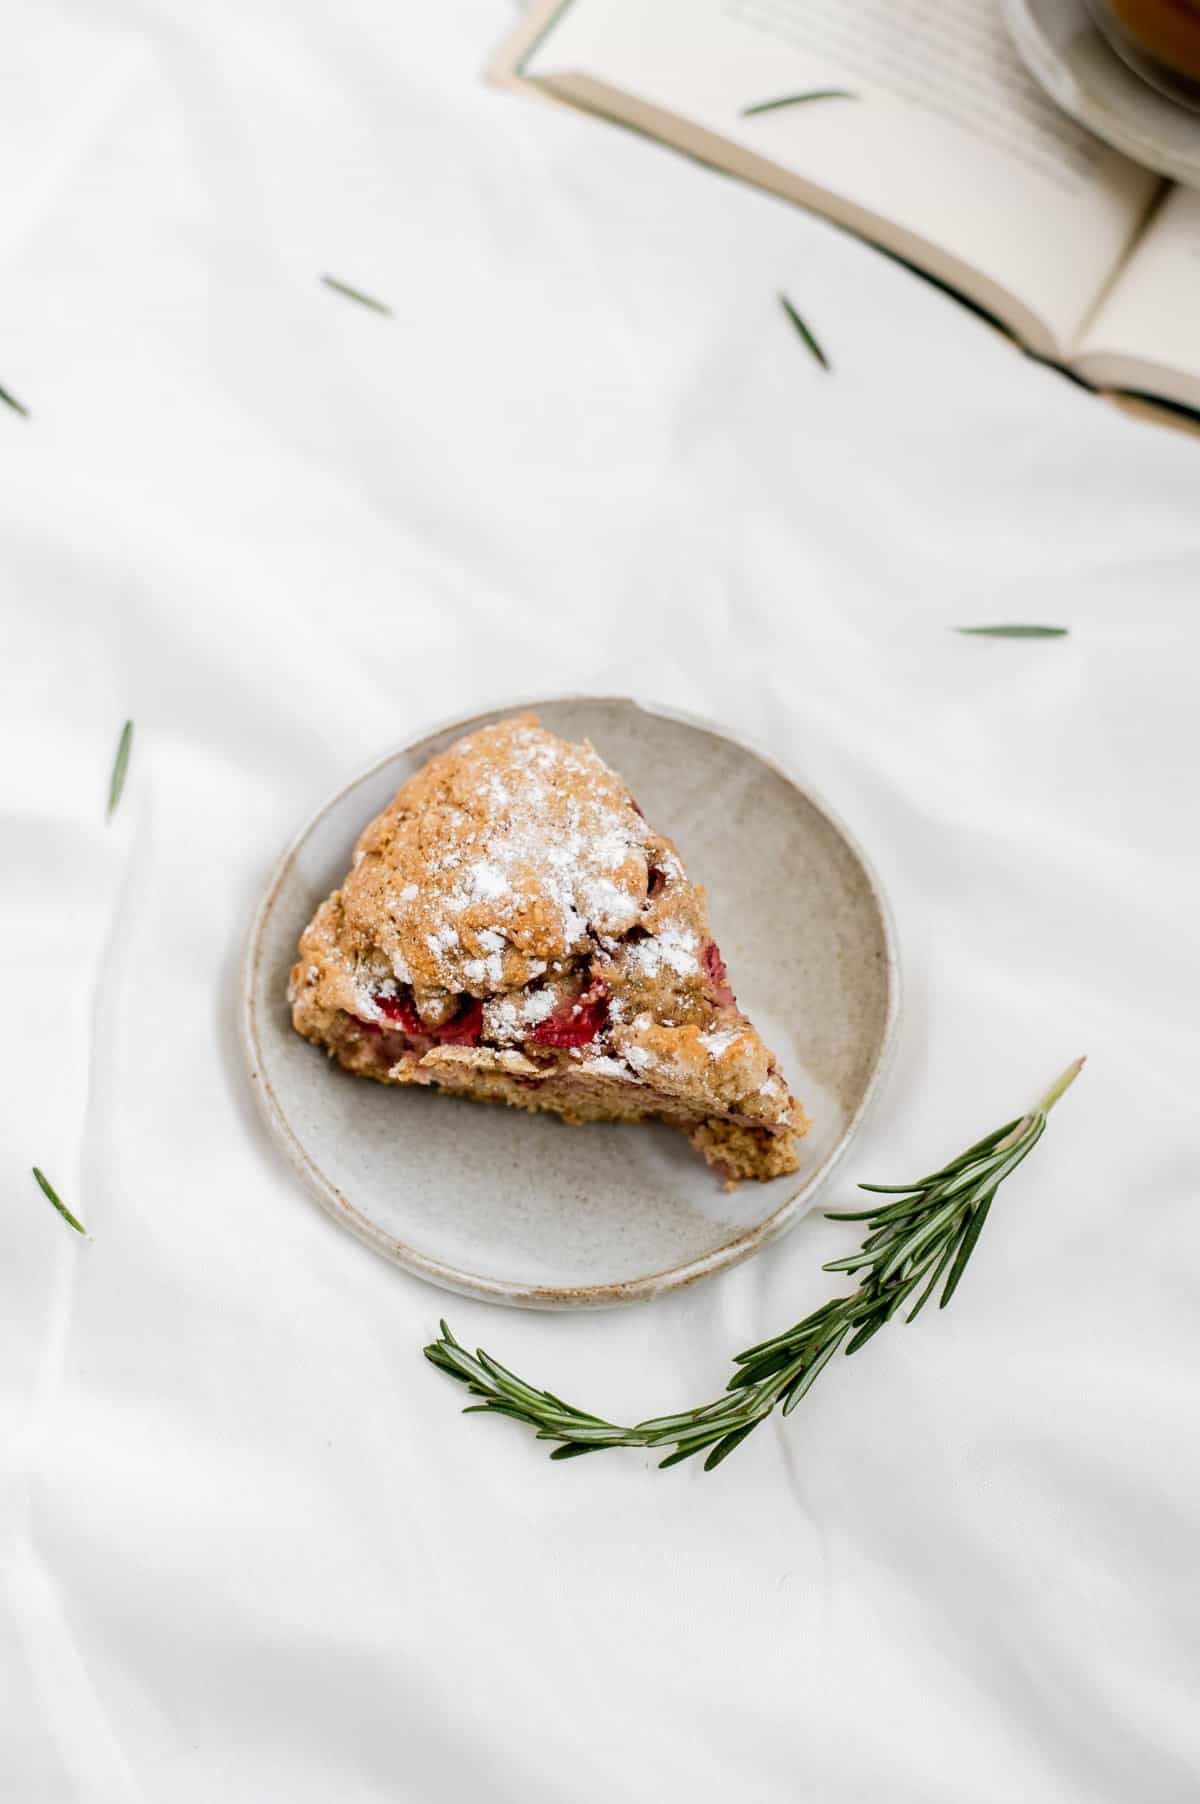 Overhead shot of a slice of vegan strawberry rosemary scone on a plate.